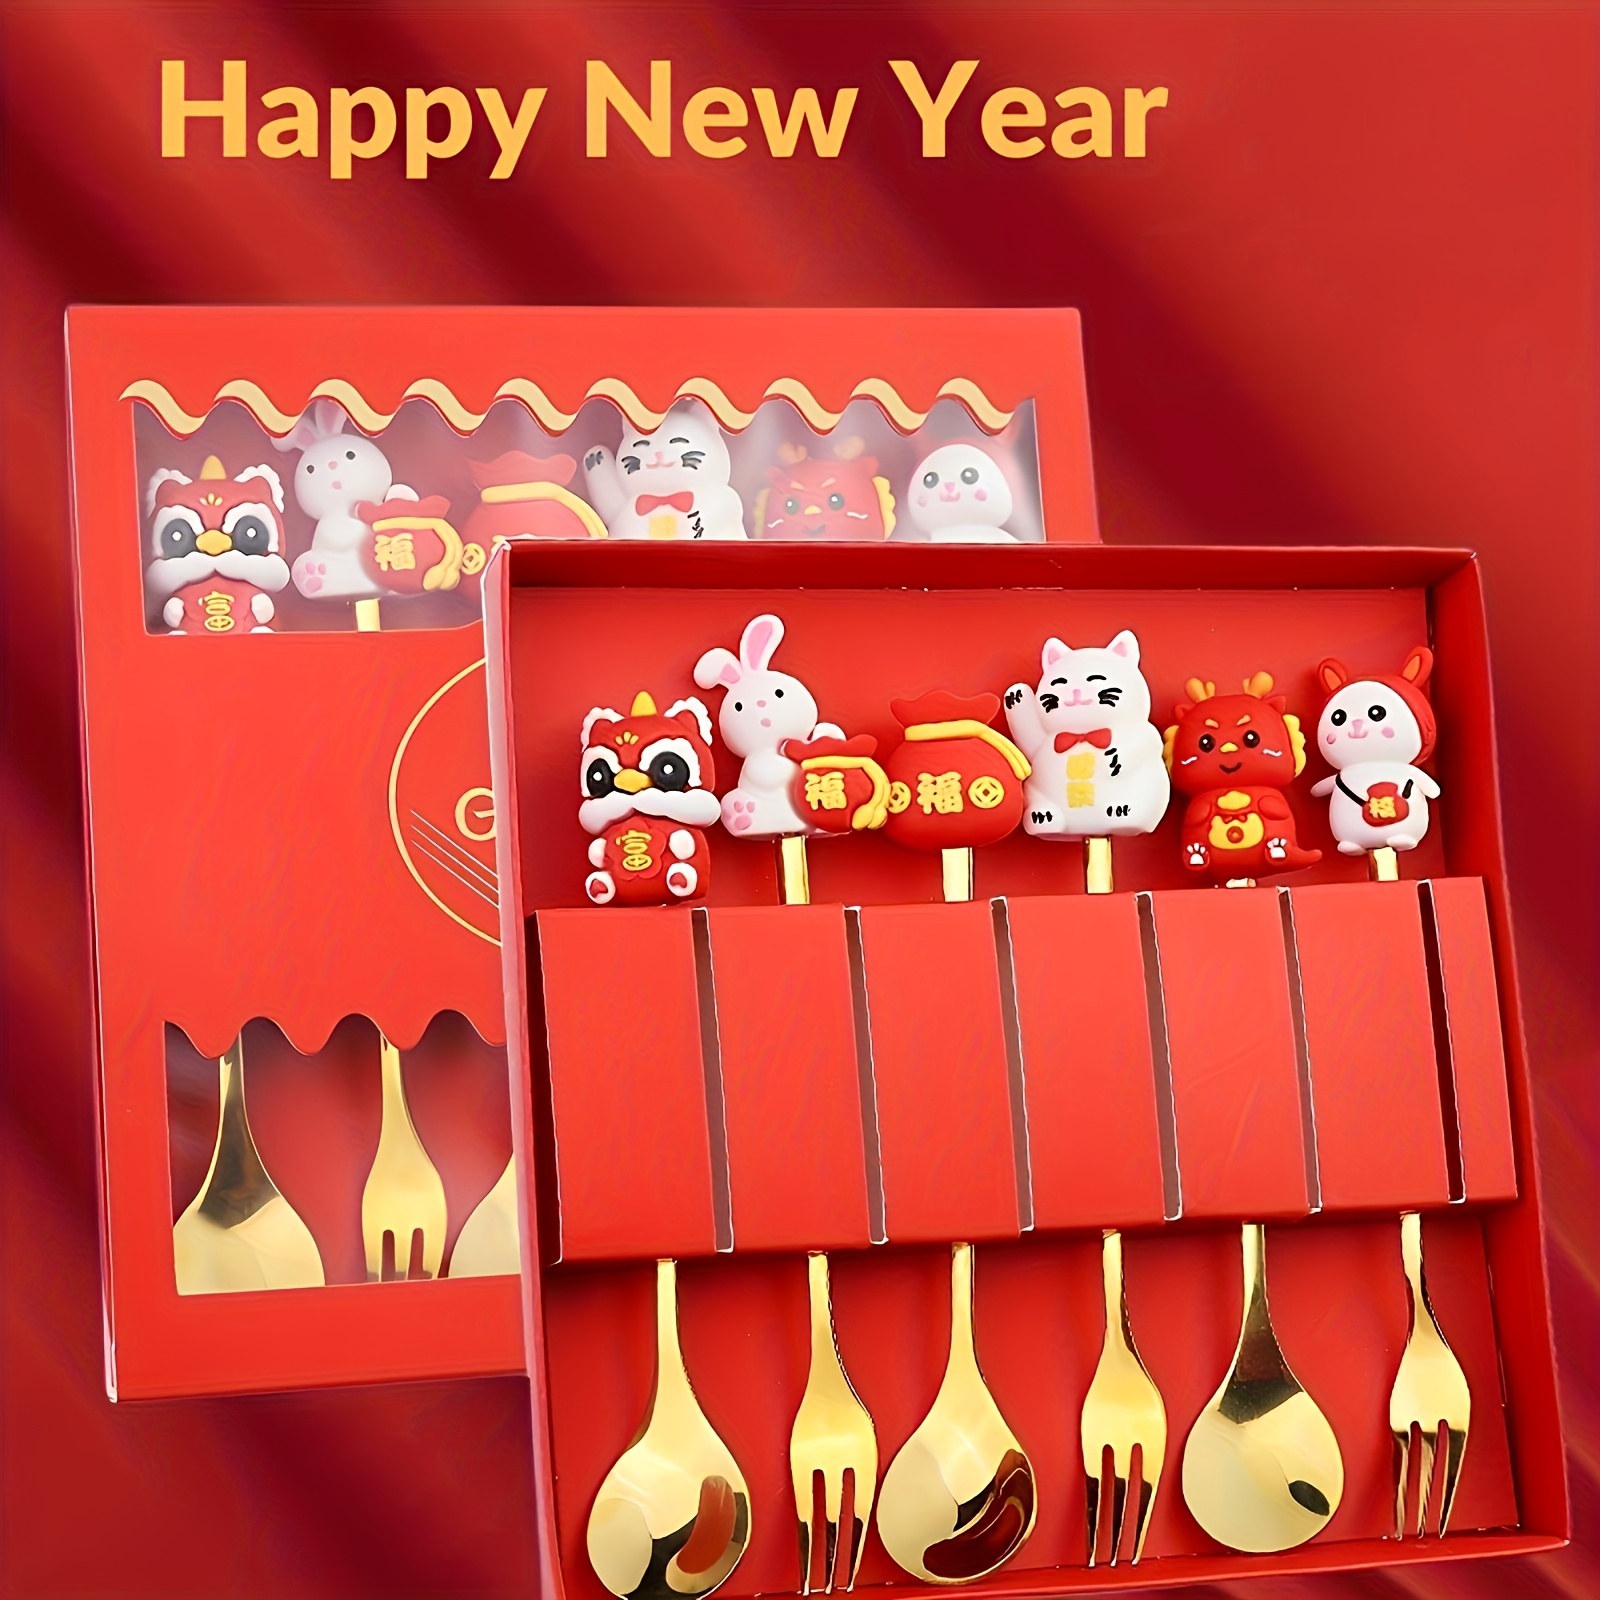 

2/4/6pcs New Year Spring Festival Style Spoon And Fork Dinnerware Gift Set, Year Of The Dragon Theme With Dragon, Rabbit, And Lucky Cat Motifs, Happy New Year Festive Party Gifts